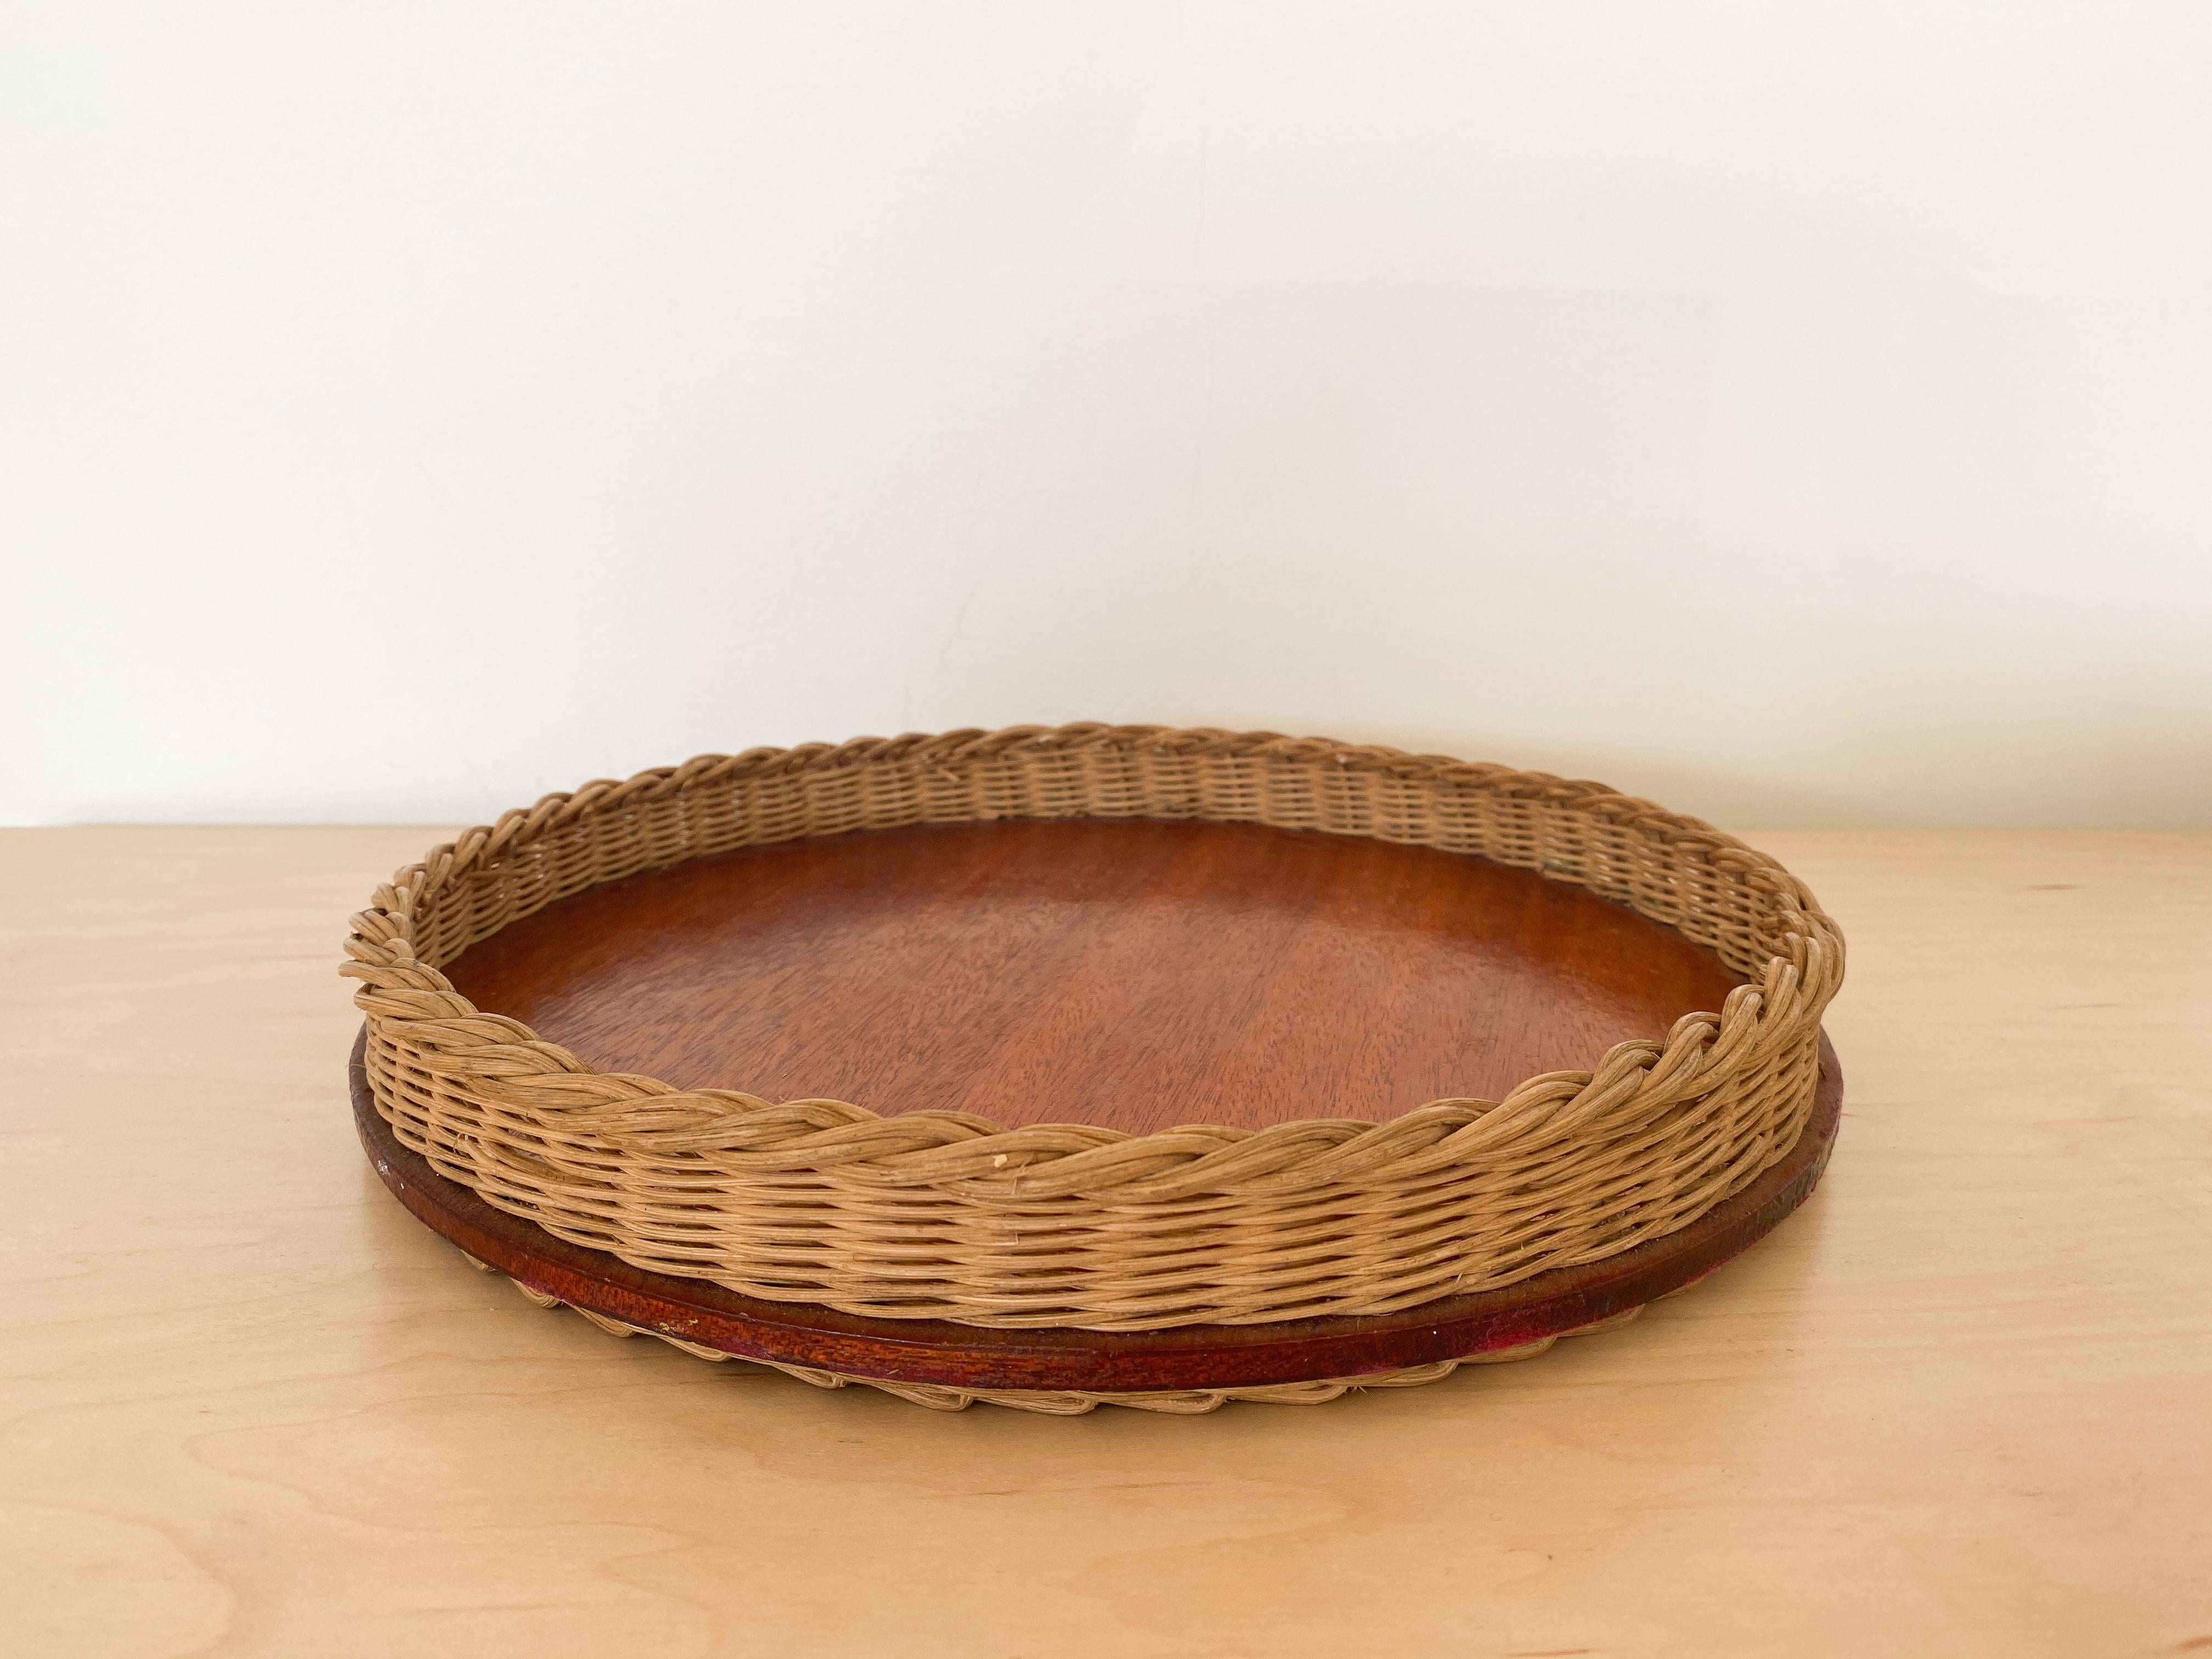 Circular woven wicker tray with leather wrapped detailing and wood bottom. Original piece from France with nice patina and age.